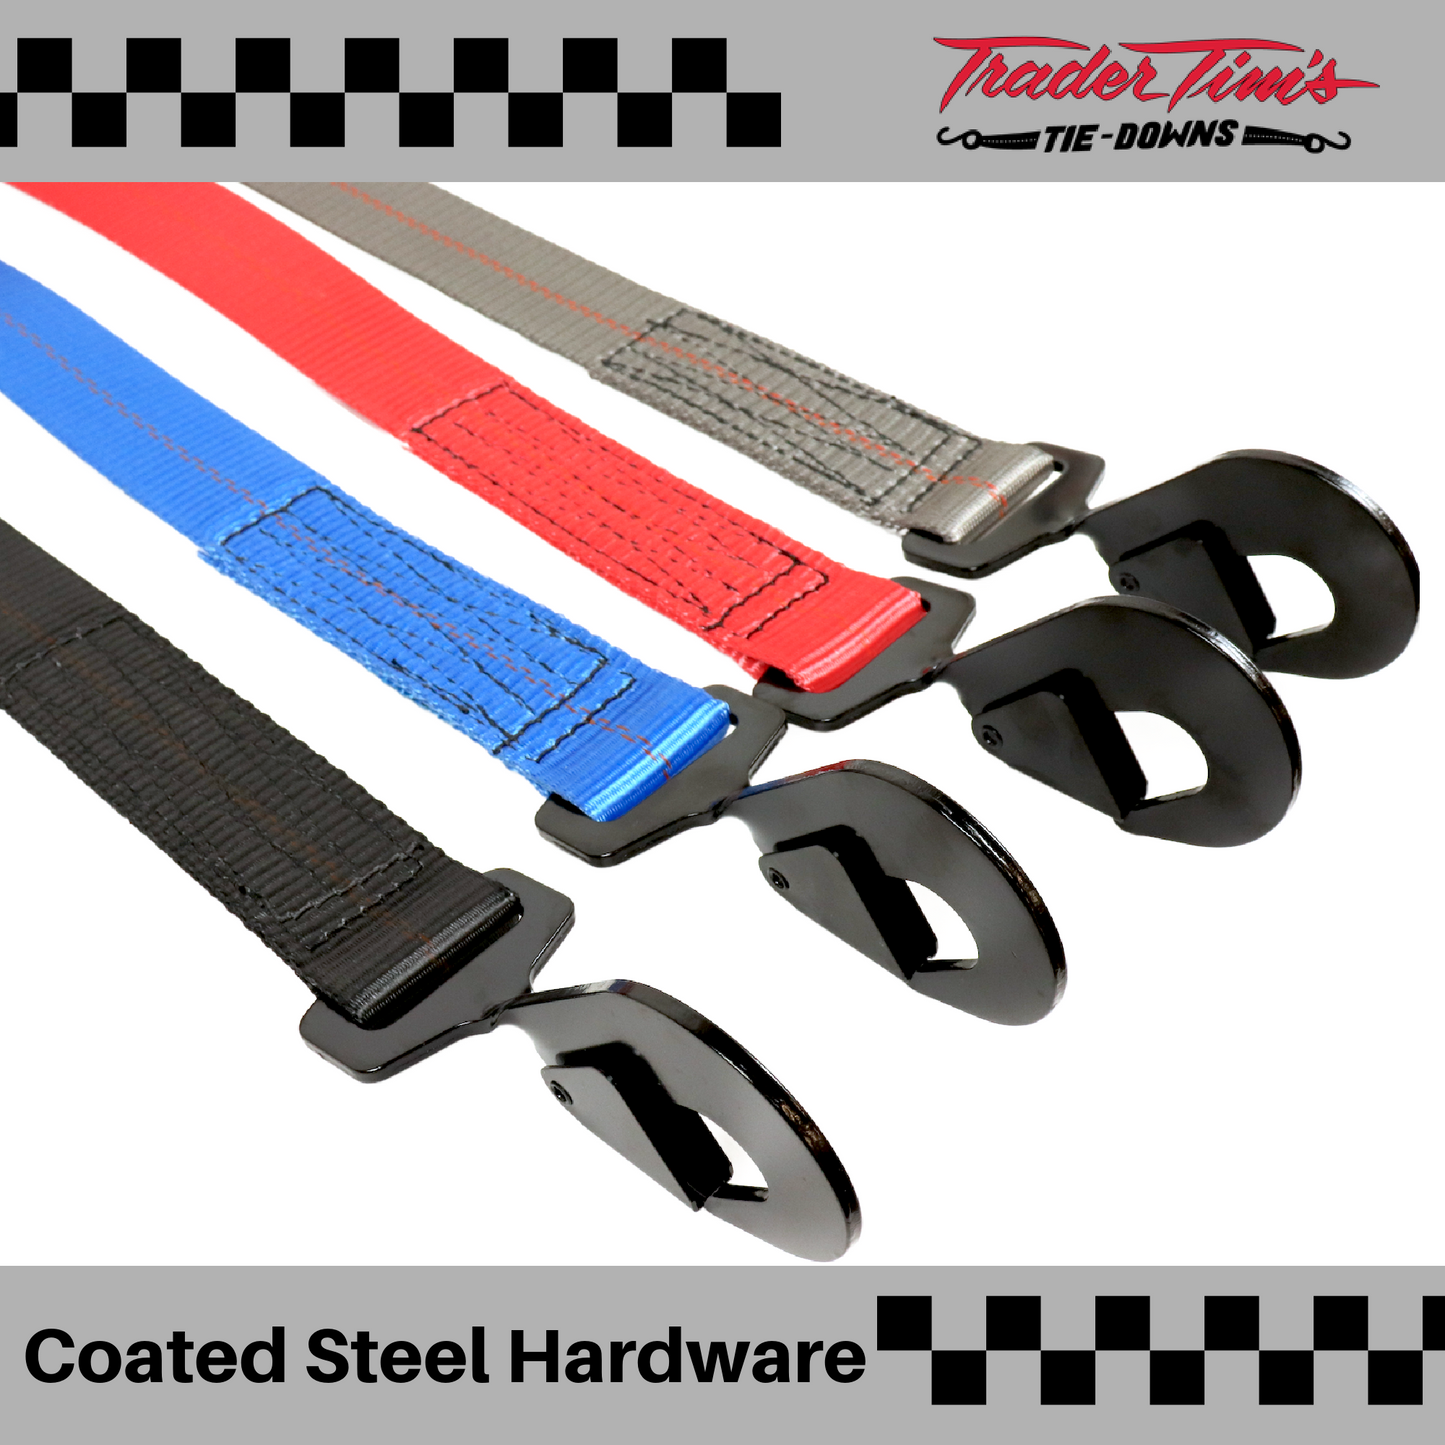 17 Piece 2" Ratchet Tie-Down with Axle Straps and Covers Kit - 4 Colors Available